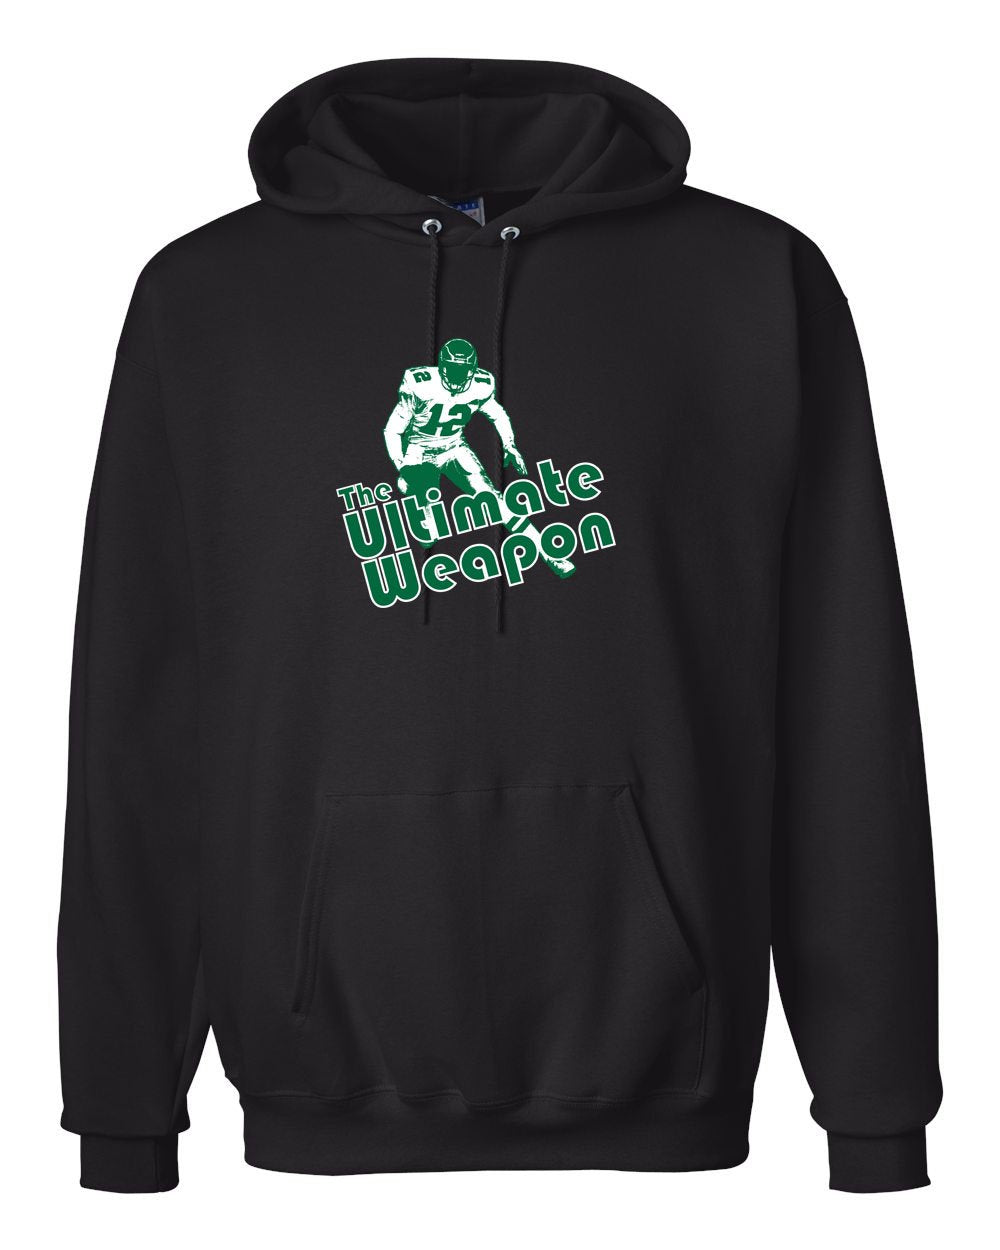 The Ultimate Weapon Hoodie